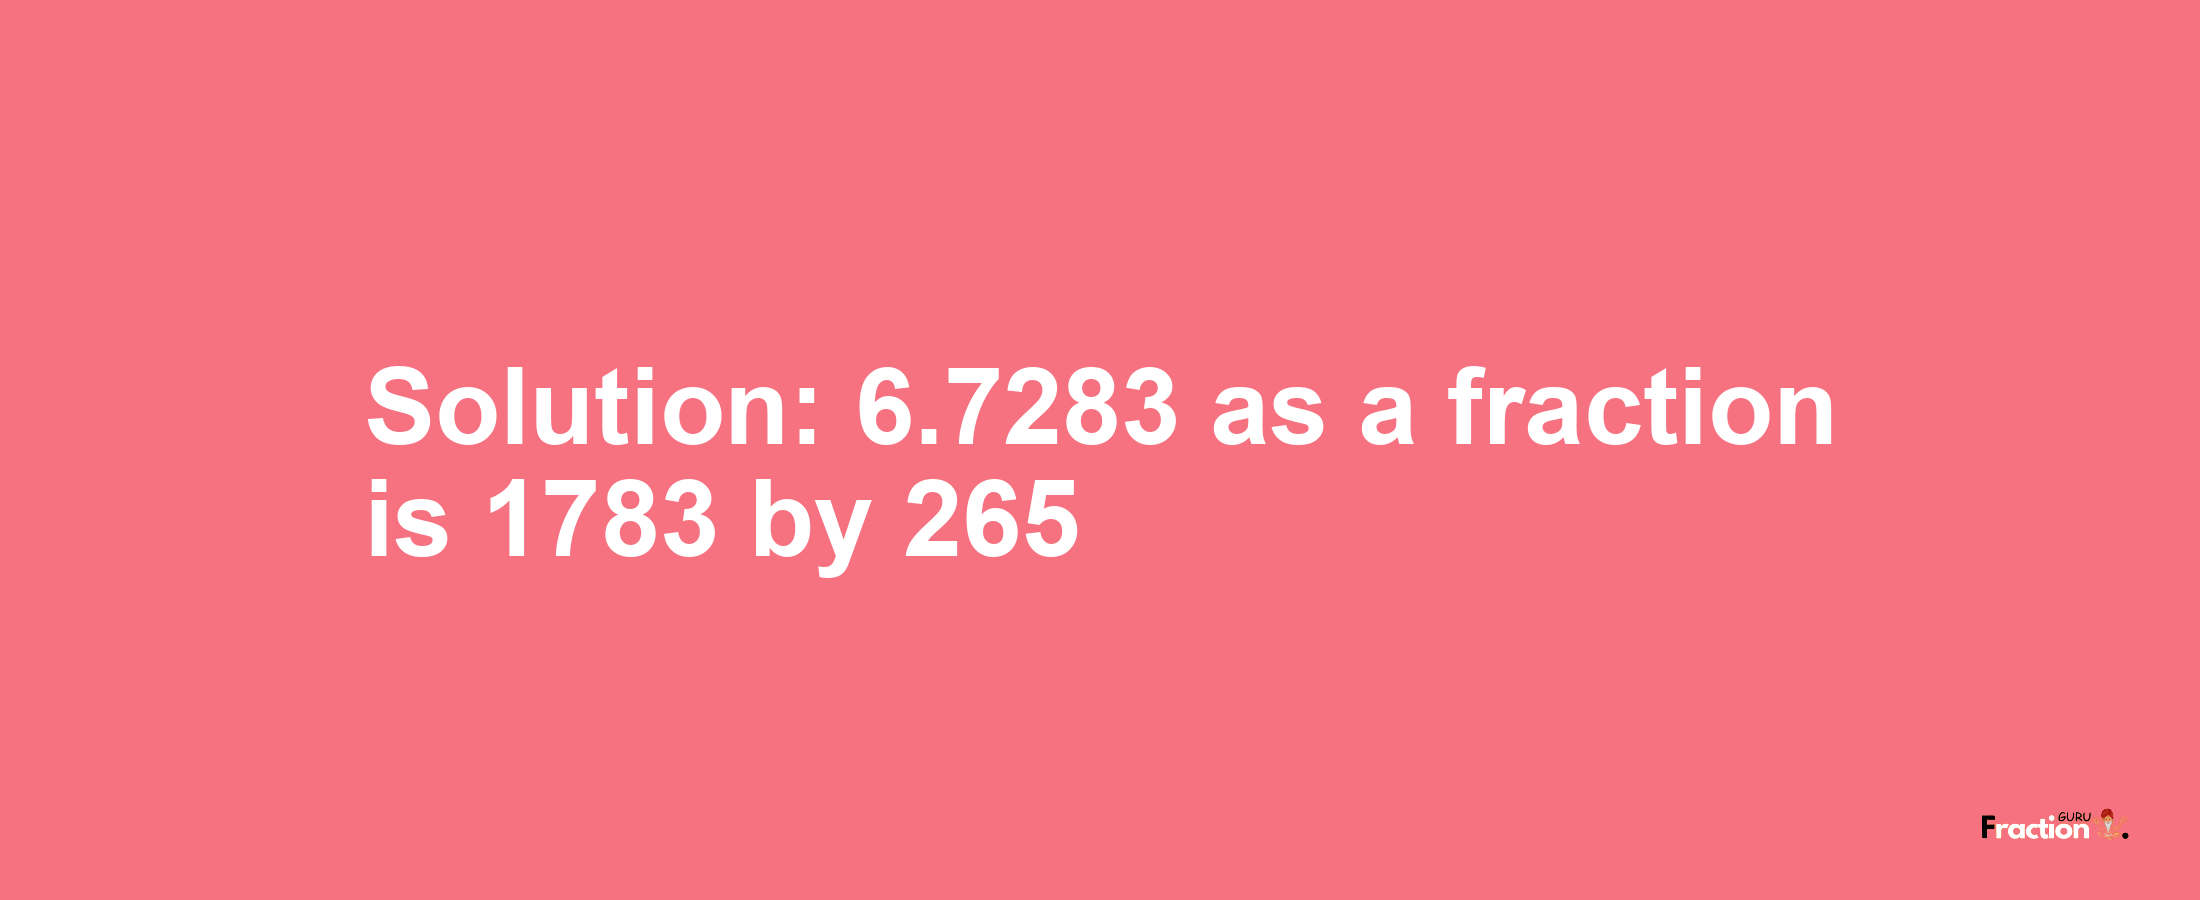 Solution:6.7283 as a fraction is 1783/265